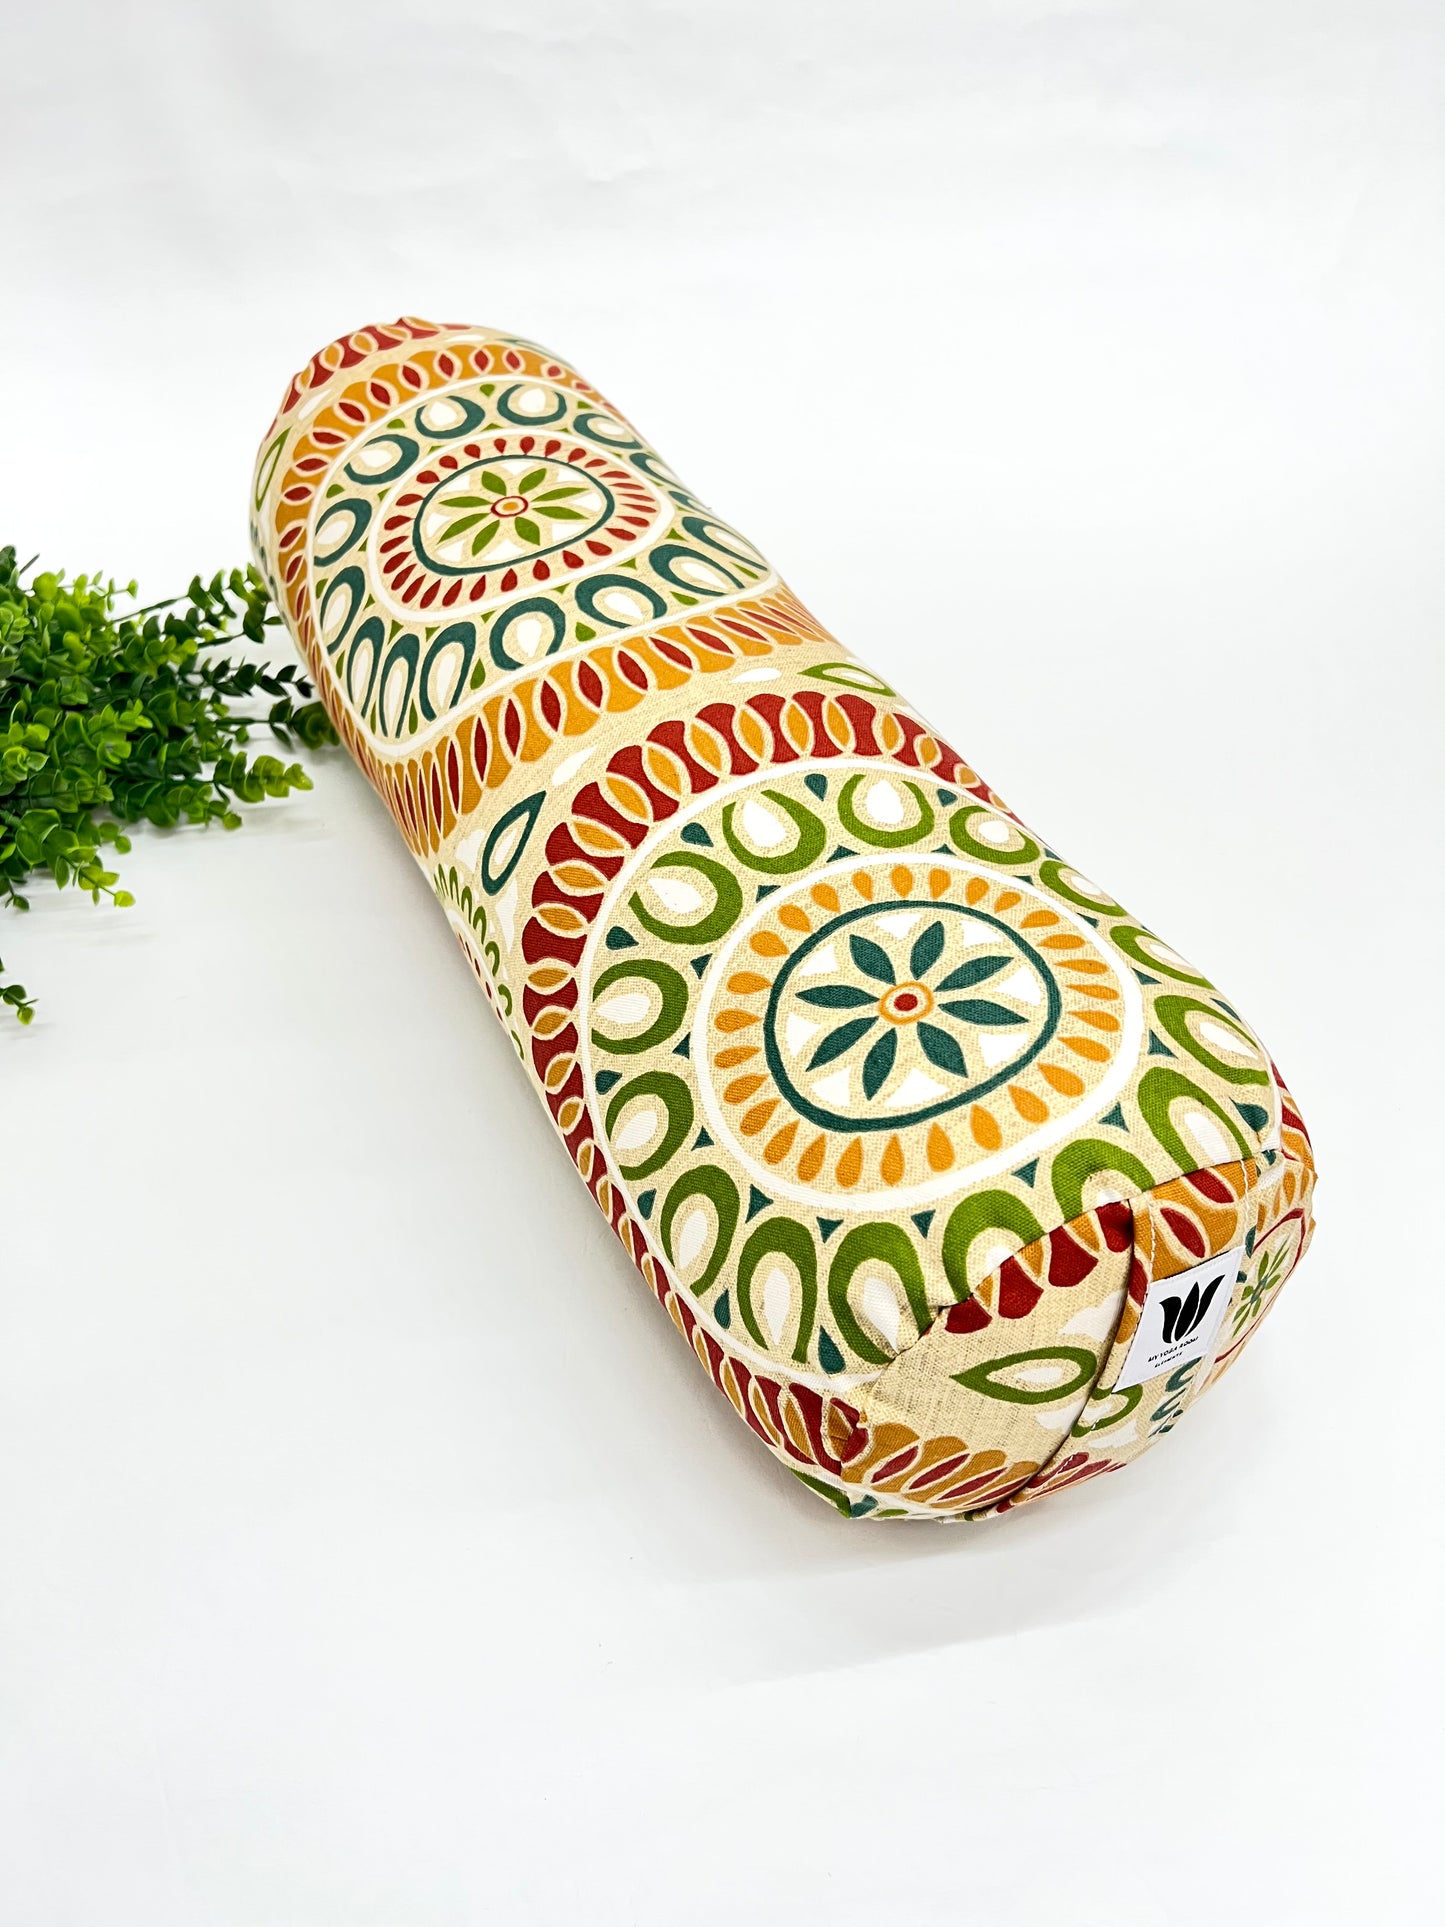 Round yoga bolster in cotton canvas citrus color mandala print fabric. Allergy conscious fill with removeable cover. Made in Canada by My Yoga Room Elements